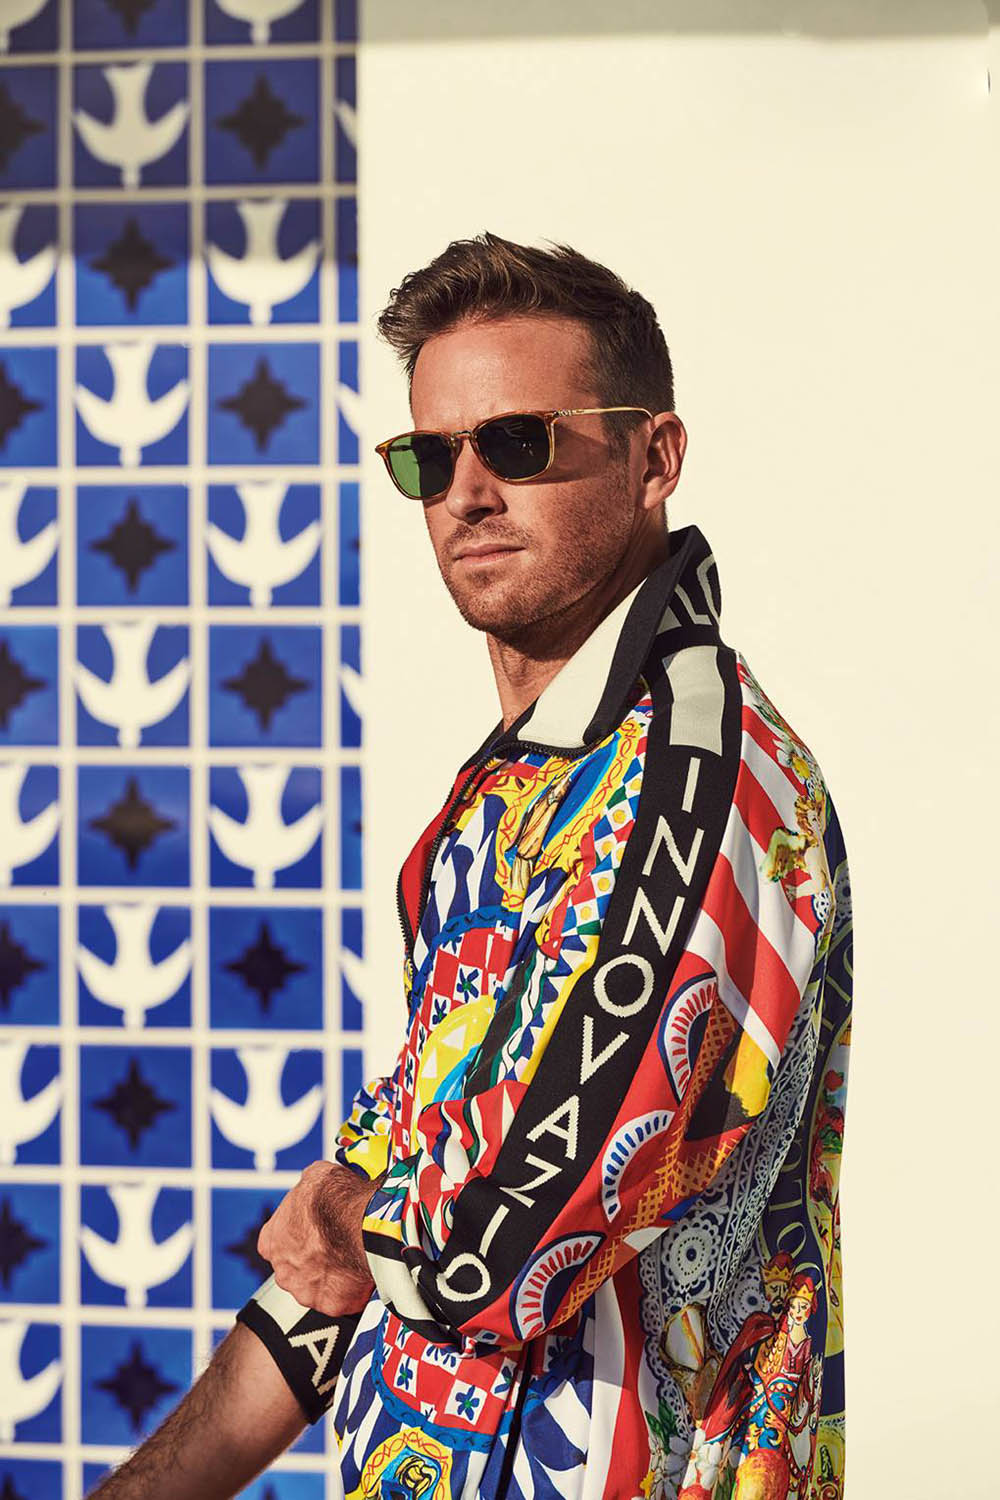 Armie Hammer covers British GQ March 2019 by Eric Ray Davidson